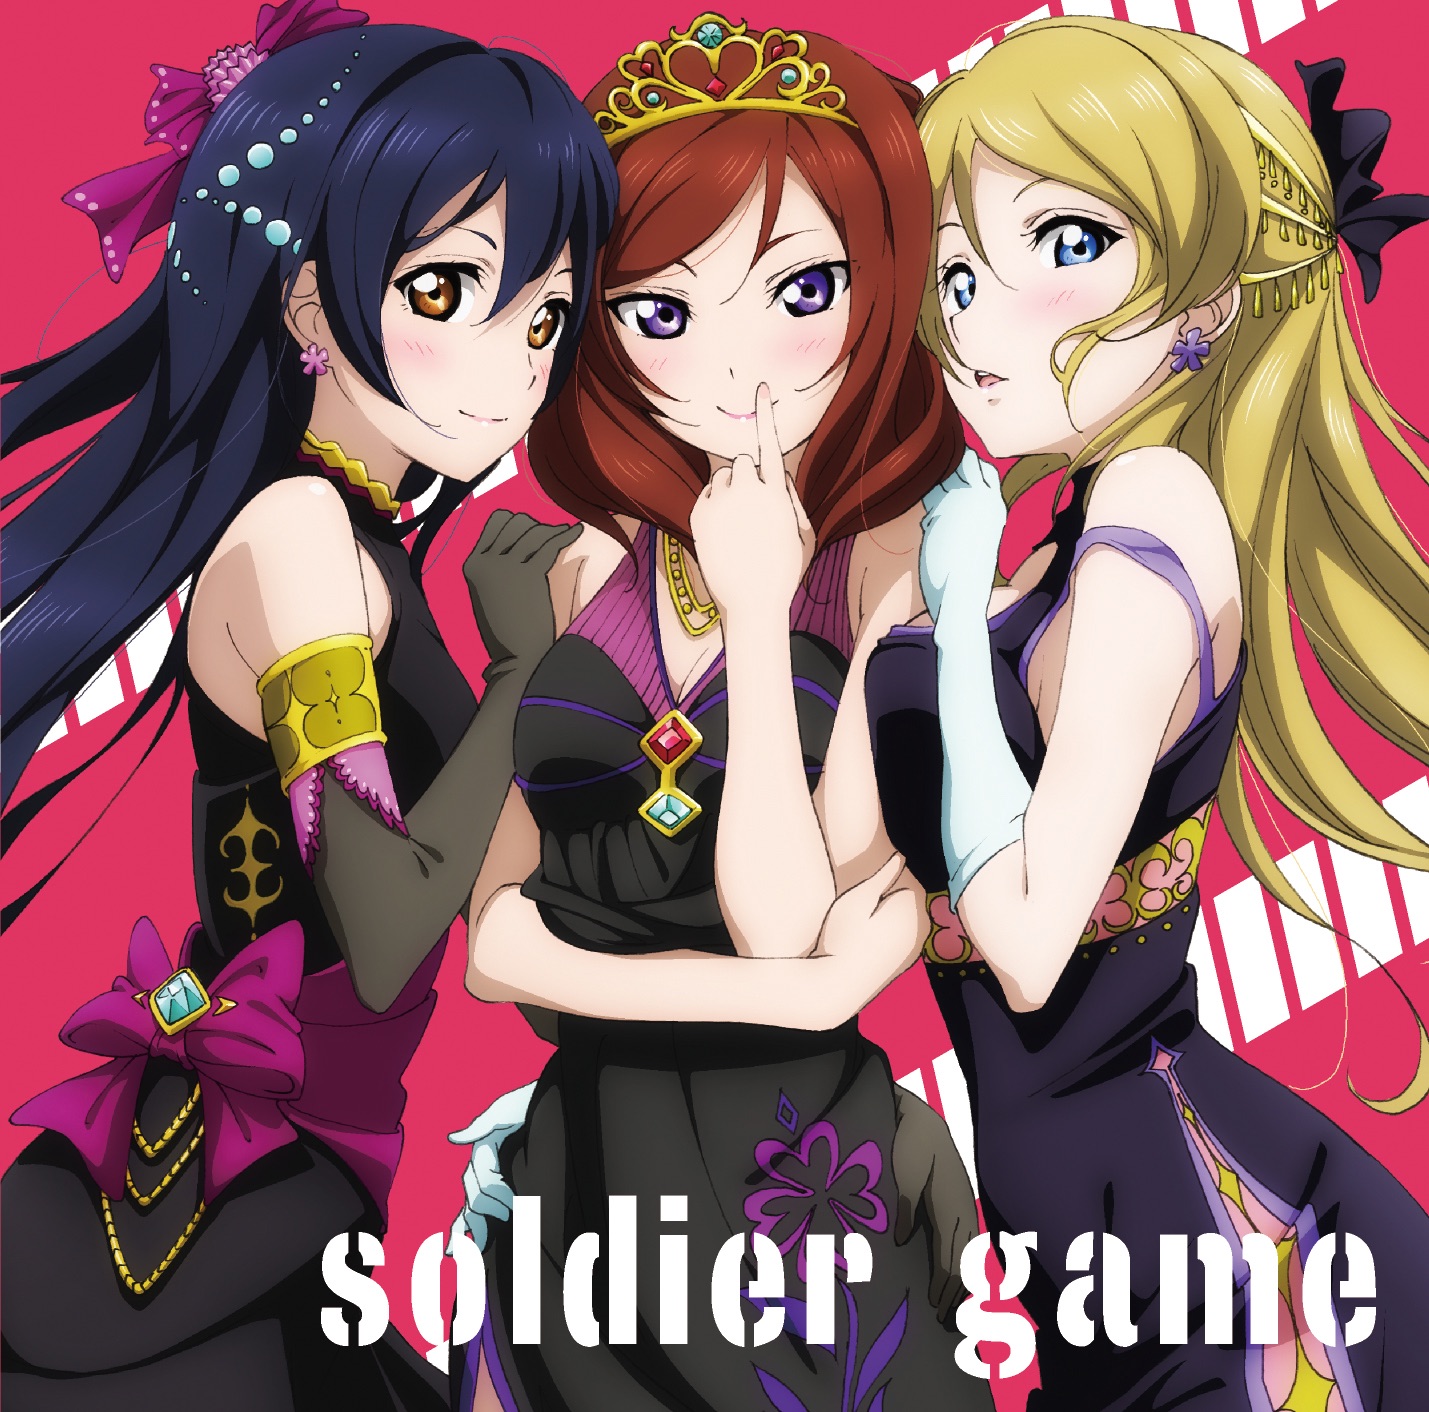 soldier game - EP